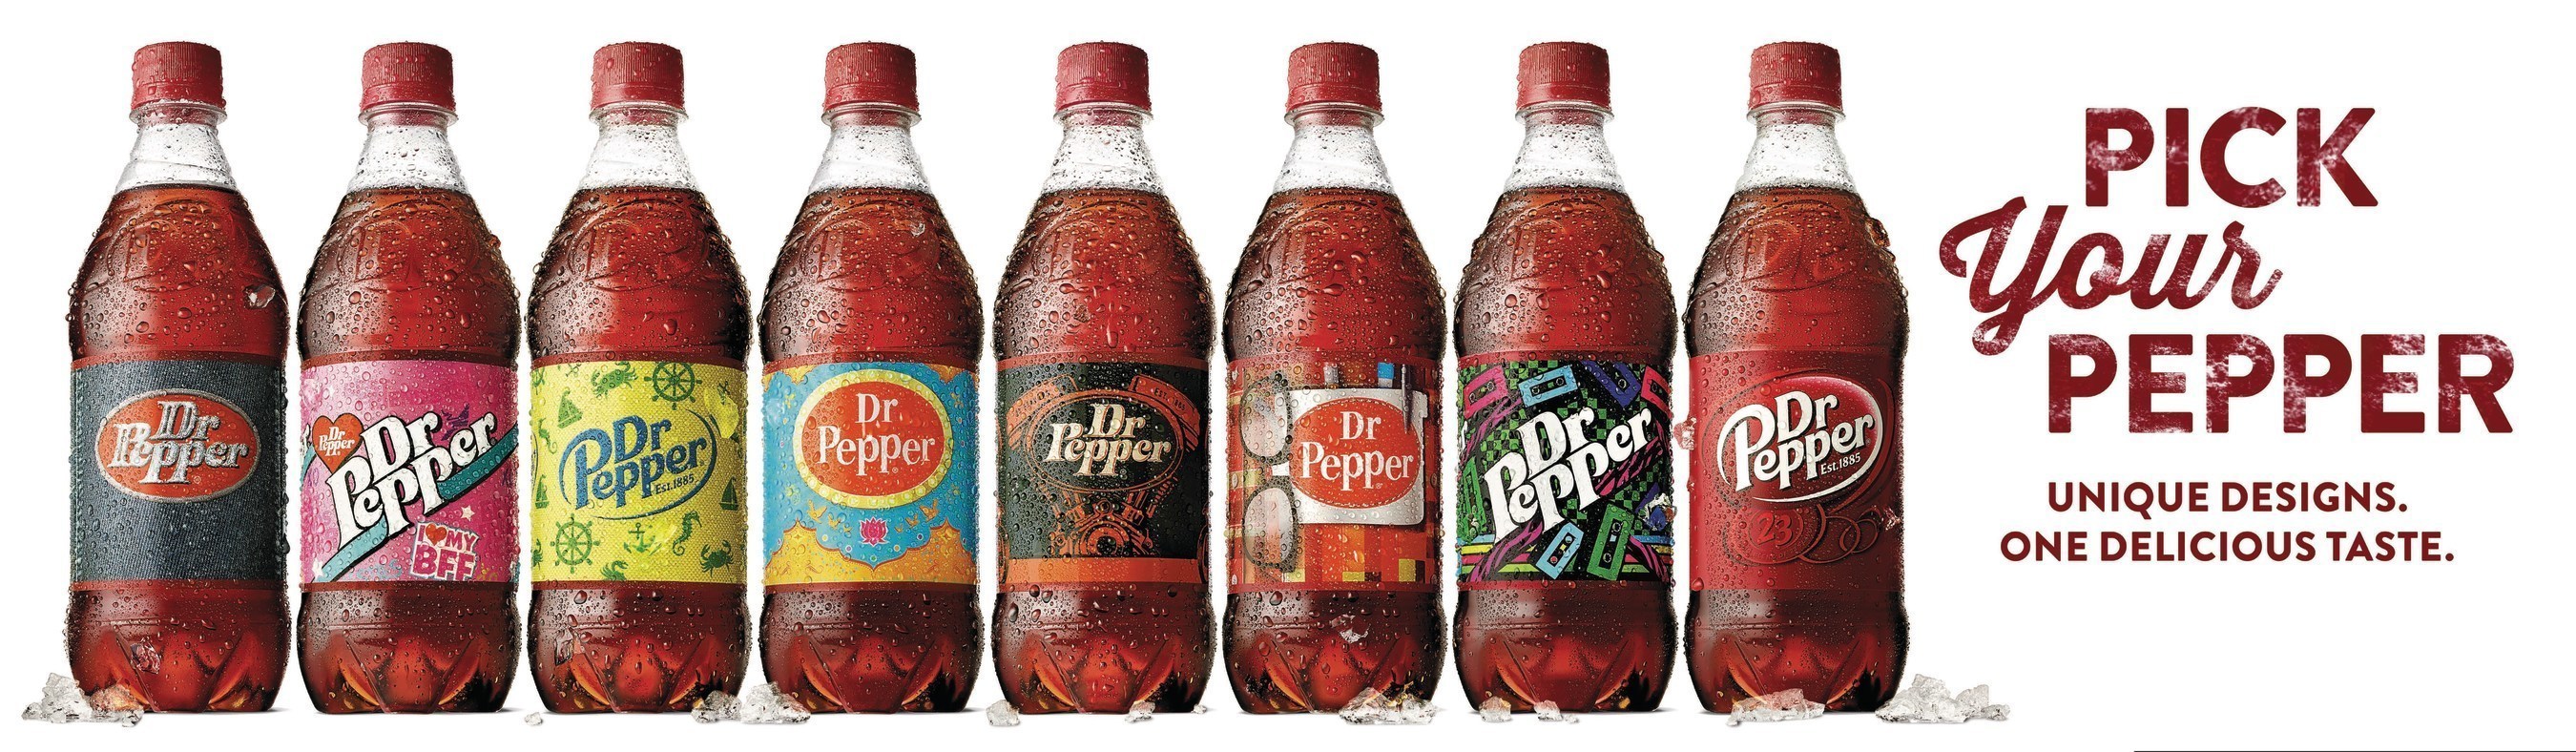 Dr Pepper Pick Your Pepper encouraging consumers to choose the label that speaks uniquely to them.